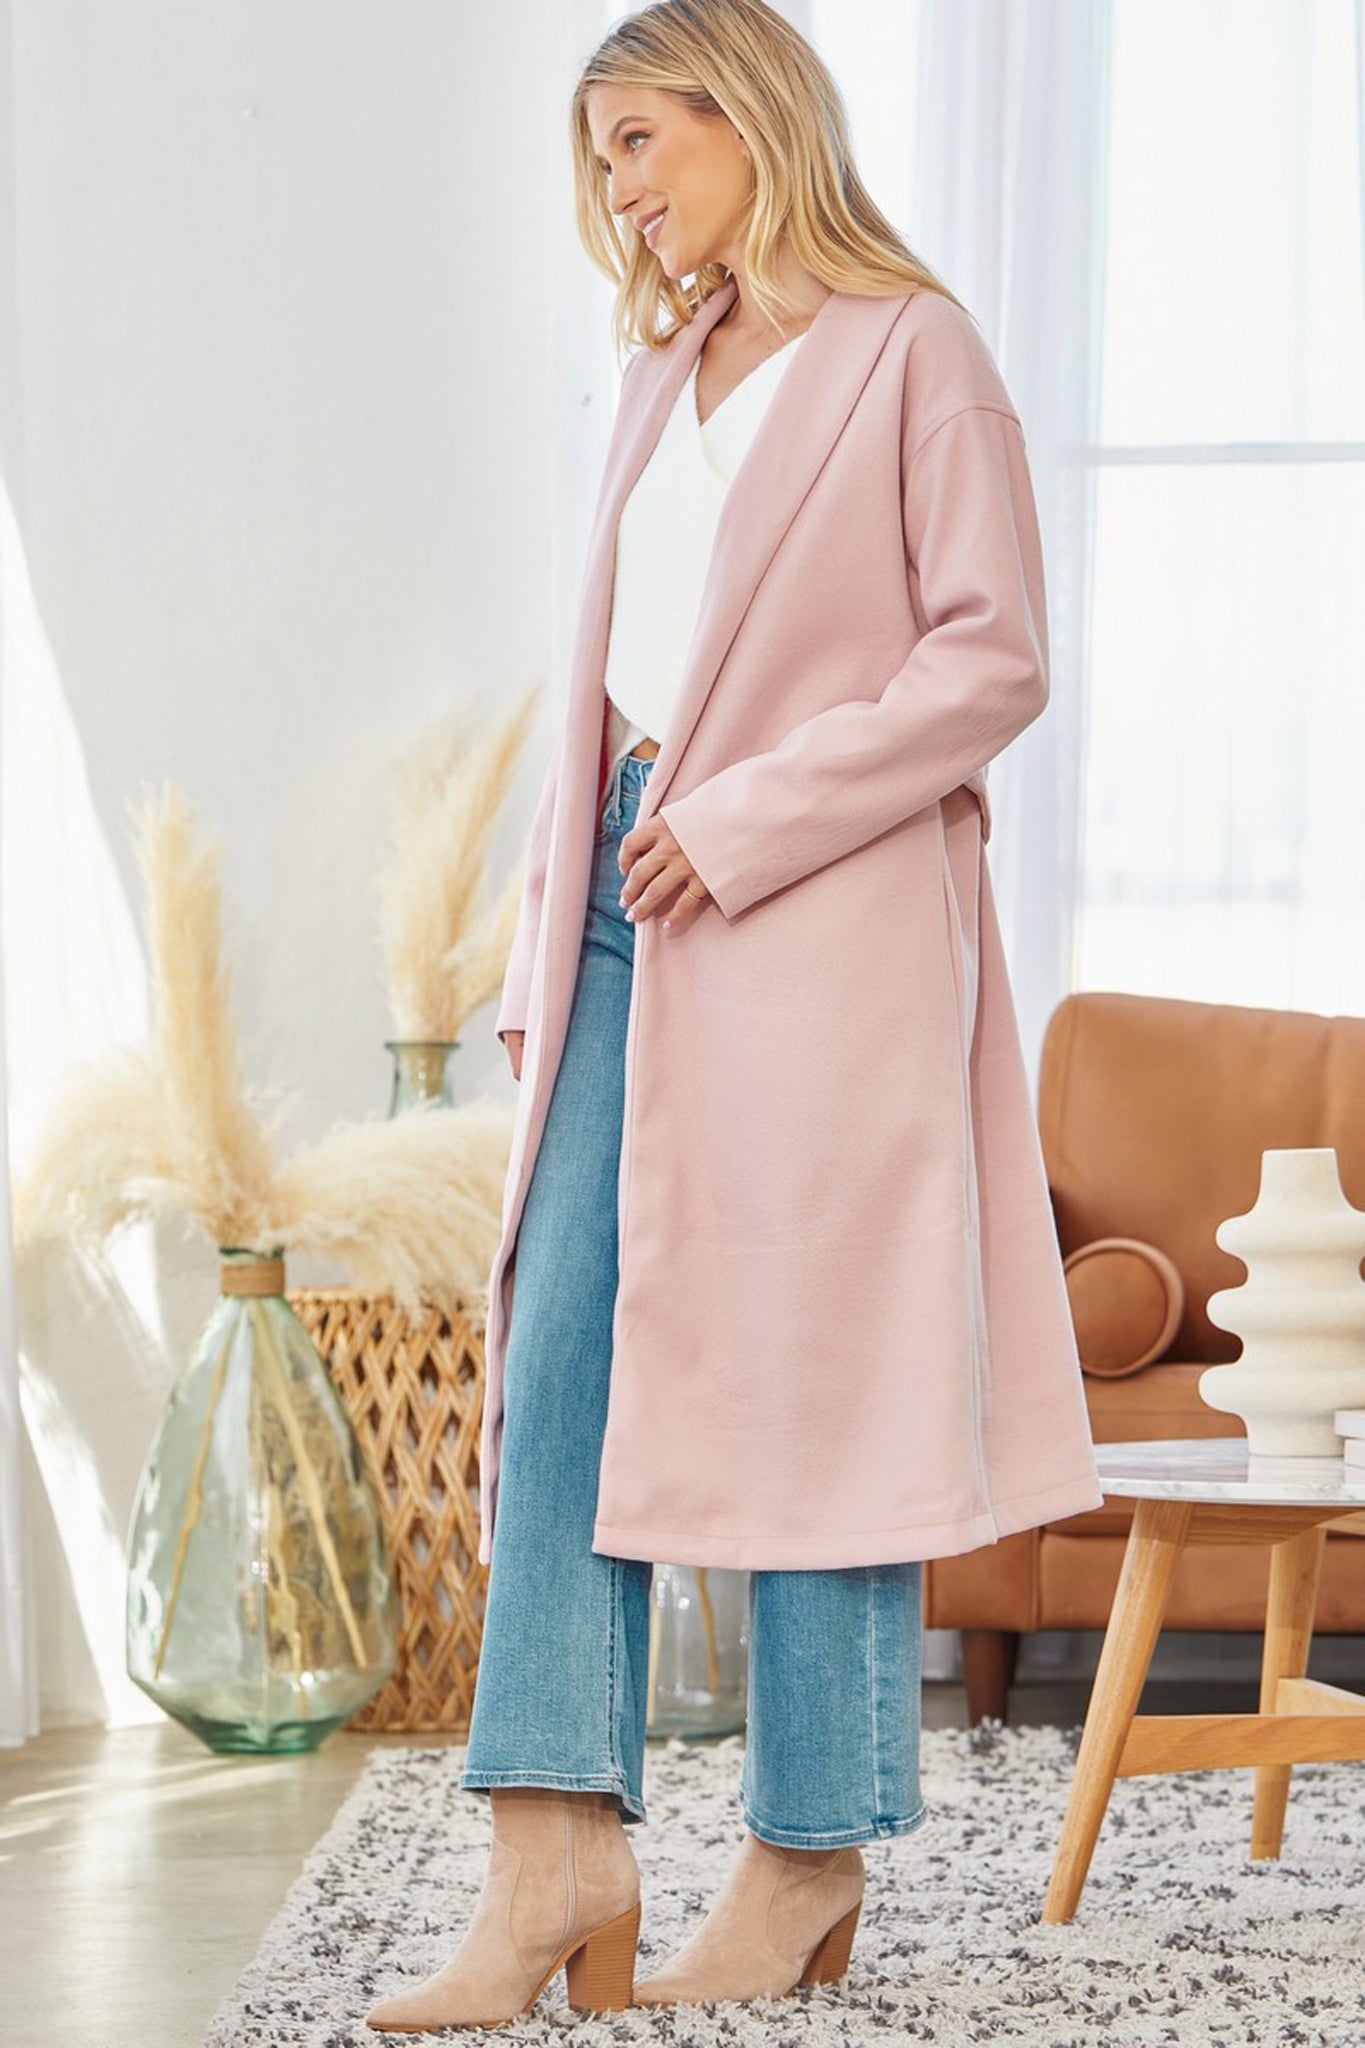 View 2 of Kasas Wrap Coat, a Outerwear from Larrea Cove. Detail: .